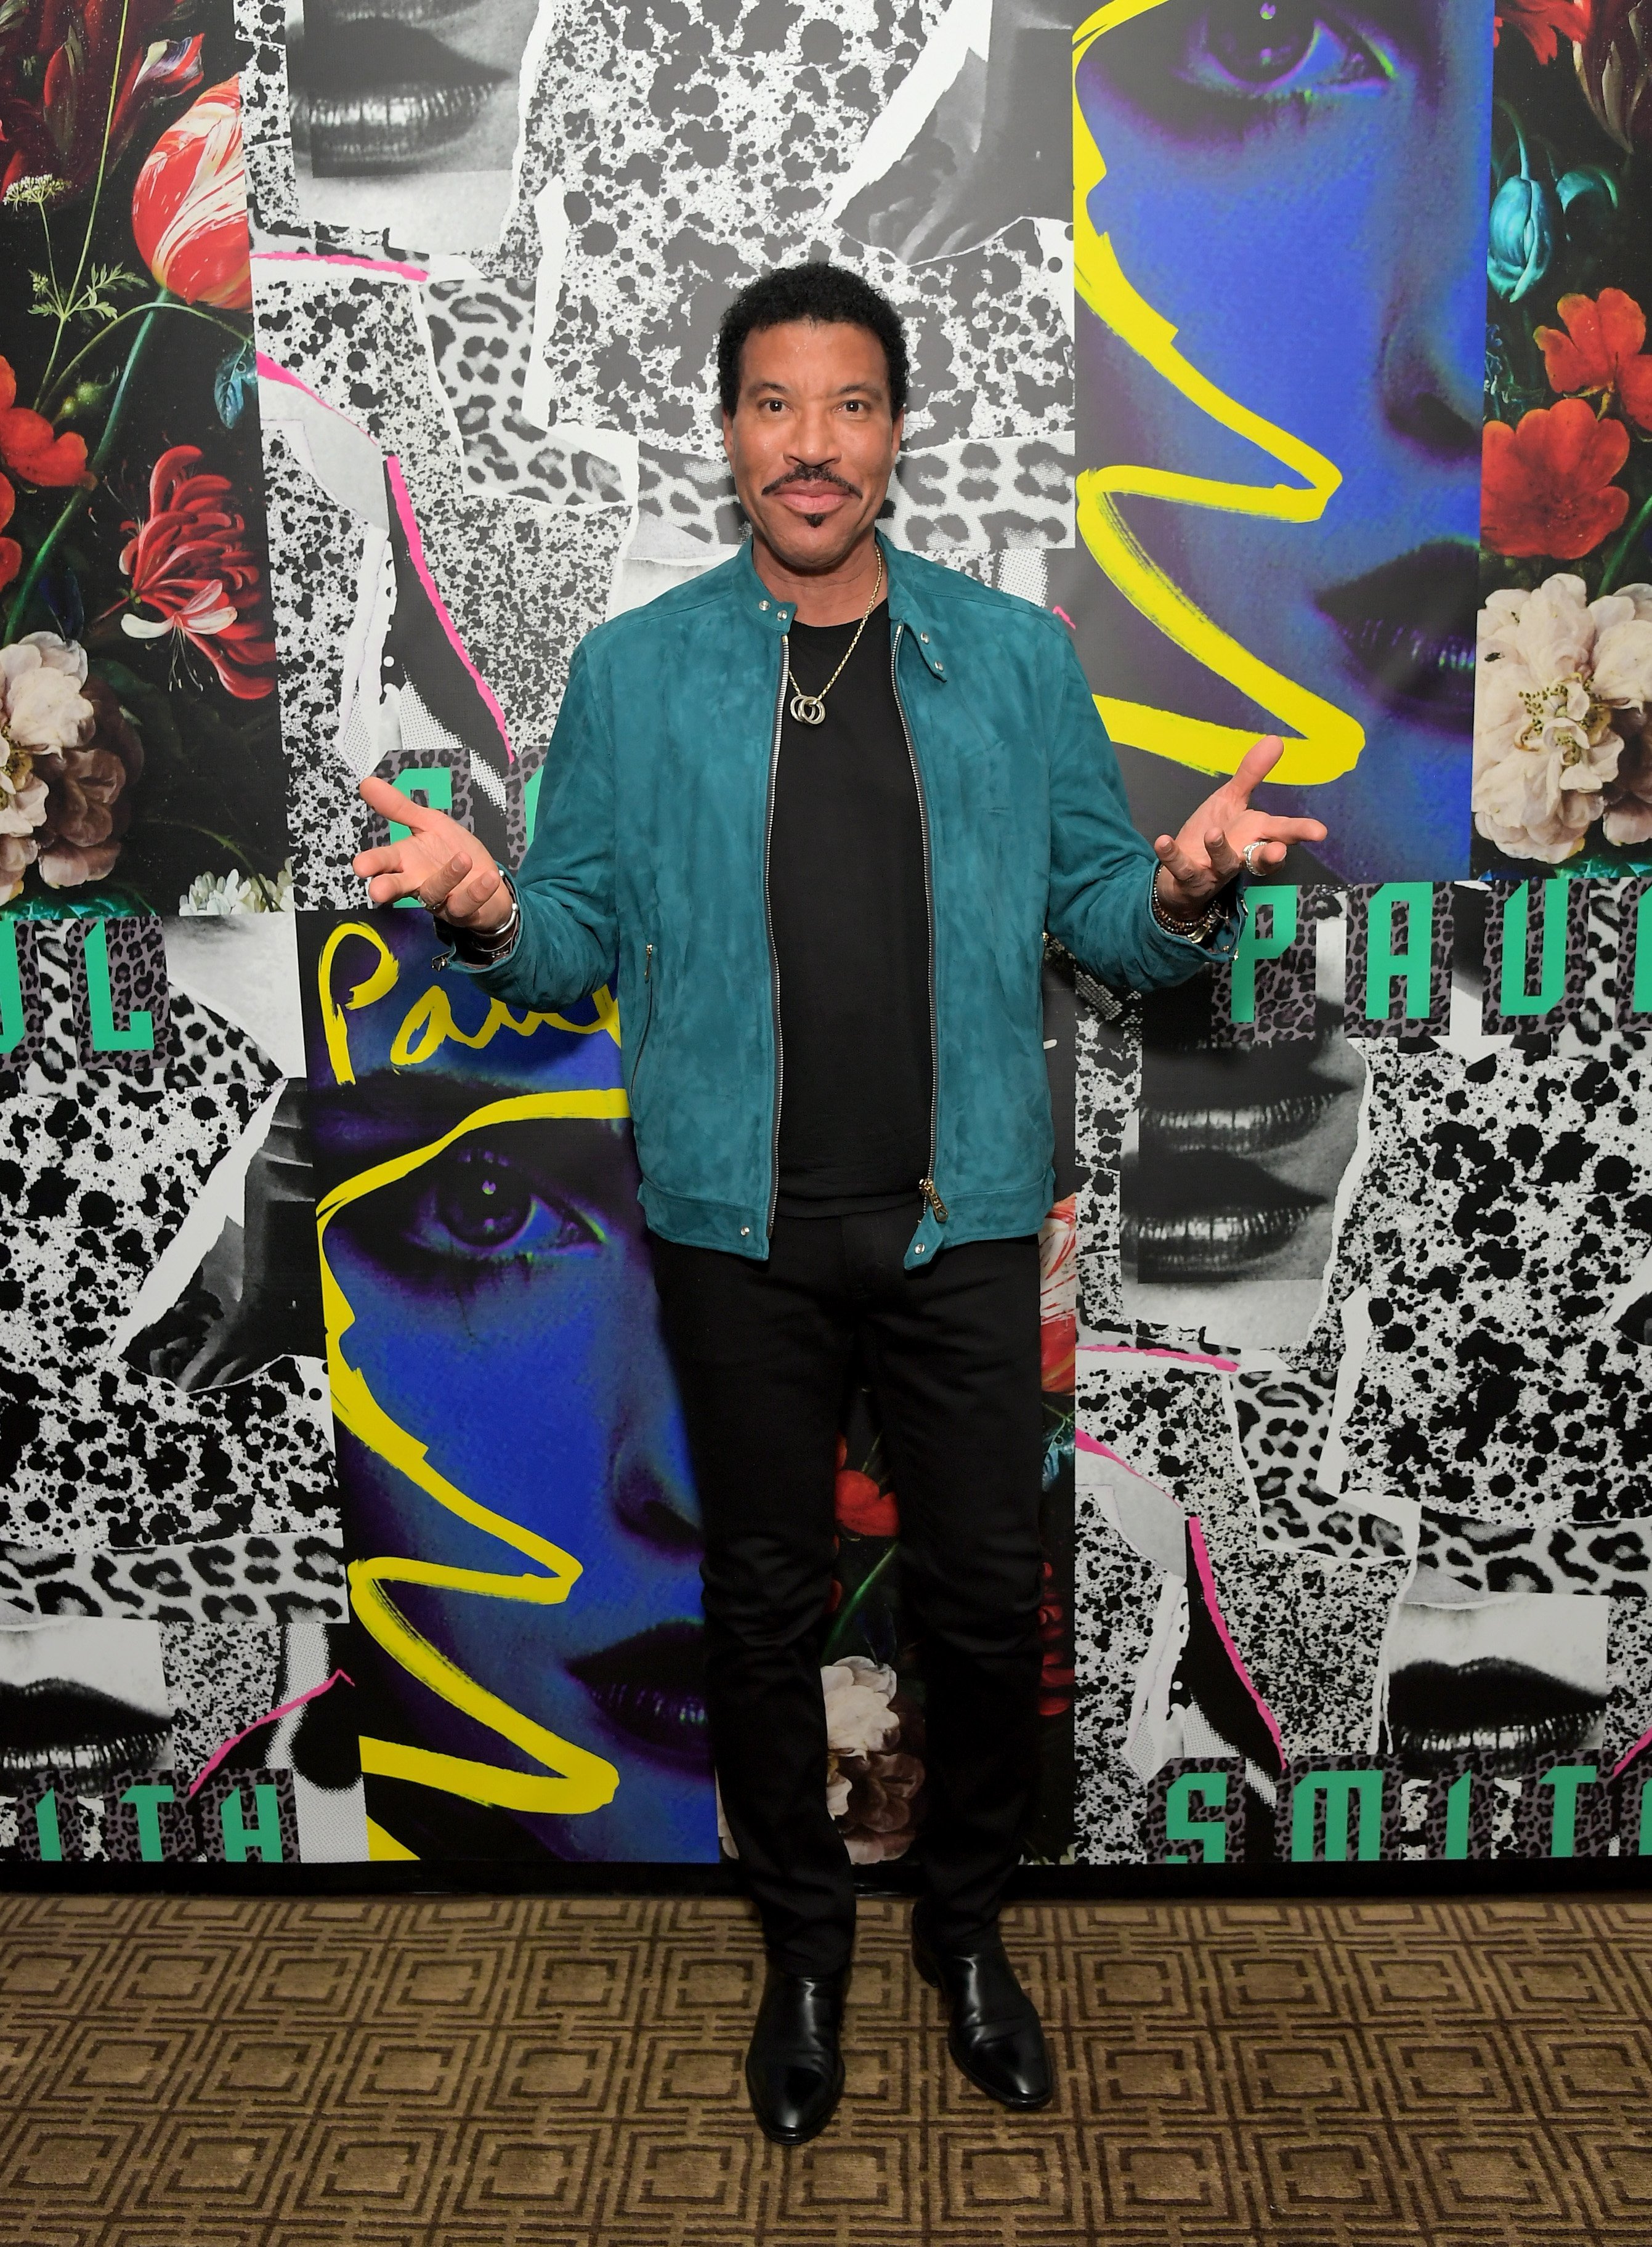  Lionel Richie attends the Paul Smith Honors John Legend dinner on May 14, 2019, in Los Angeles, California. | Source: Getty Images.